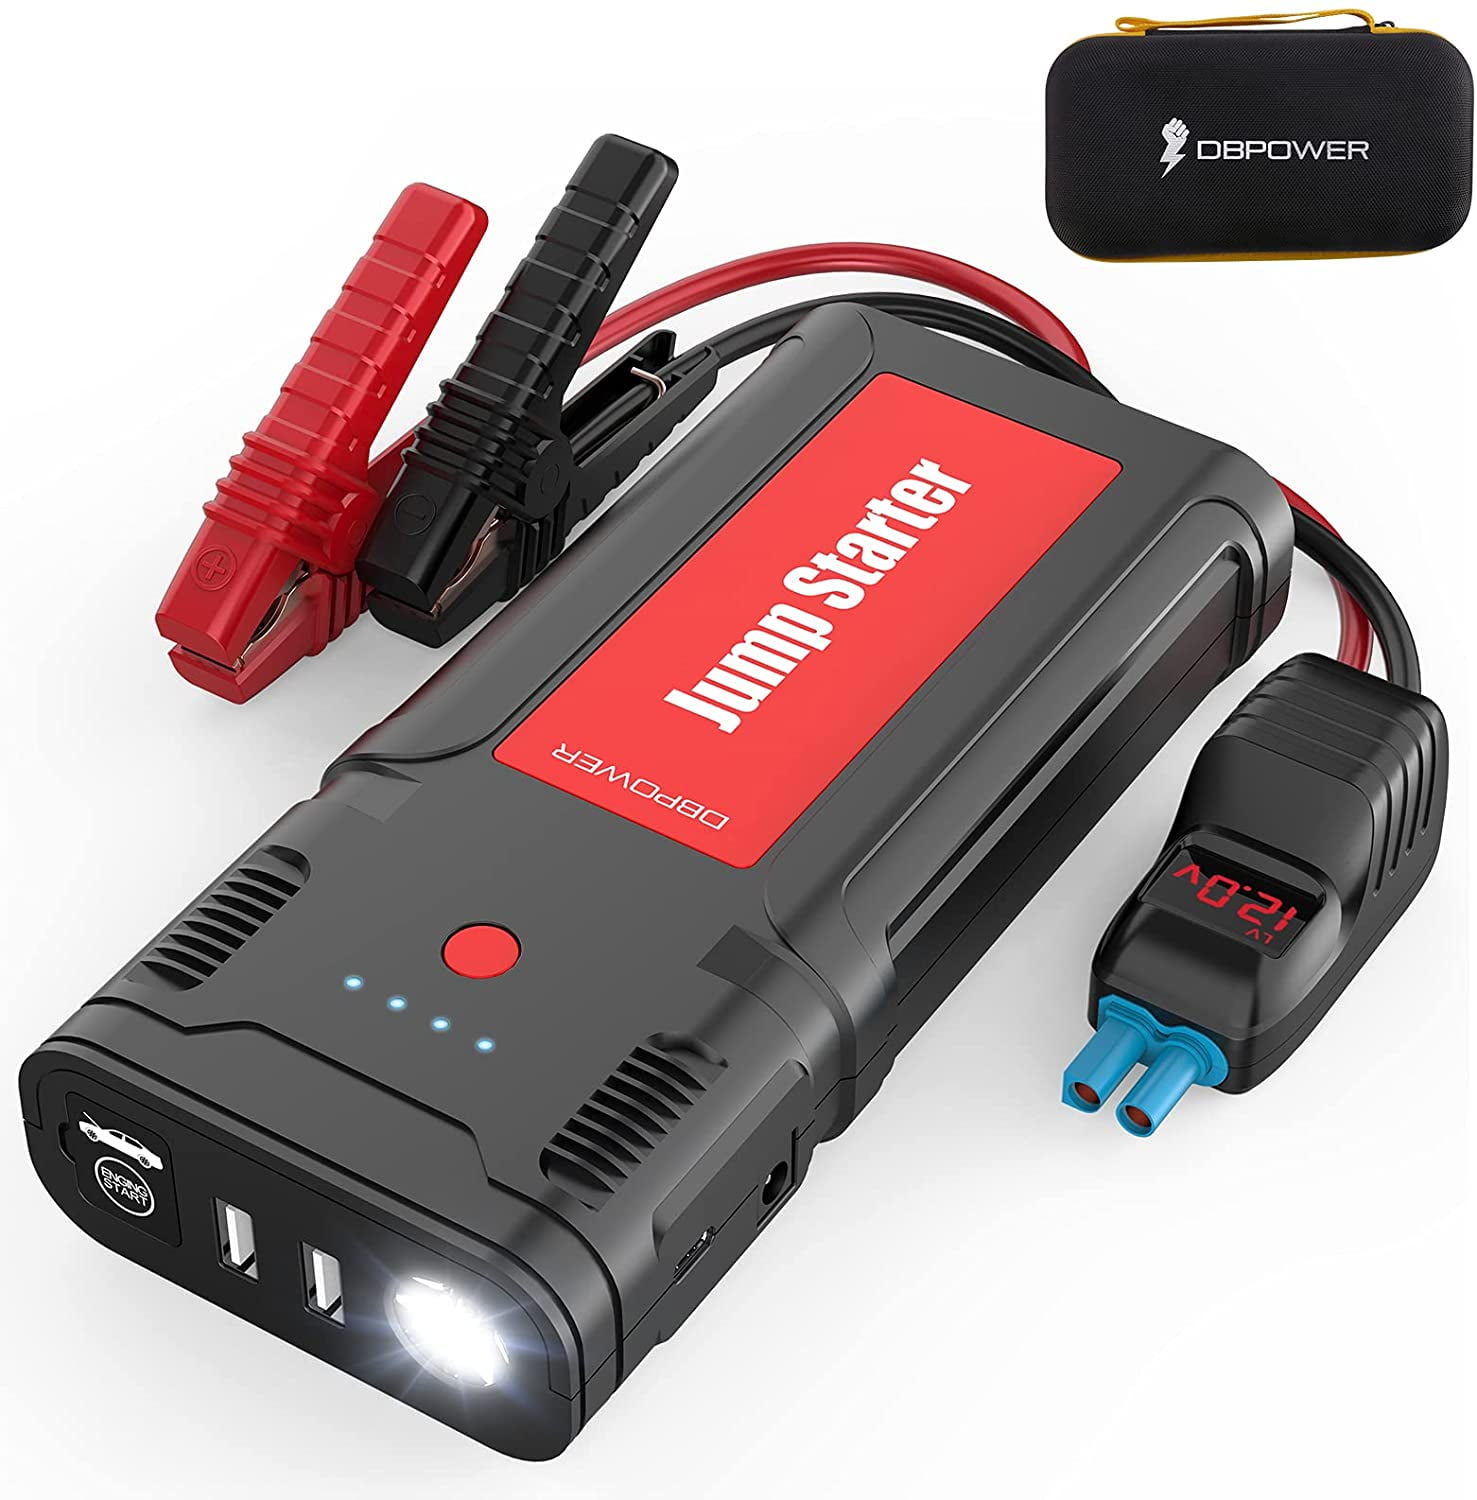 Up to 8.0L Gasoline/6.5L Diesel Engine Car Jump Starter 1500A Peak Trekpow 12V Auto Battery Booster Box Type-C Port Portable Power Pack Quick-Charge LED Light with Smart Jumper Cable 